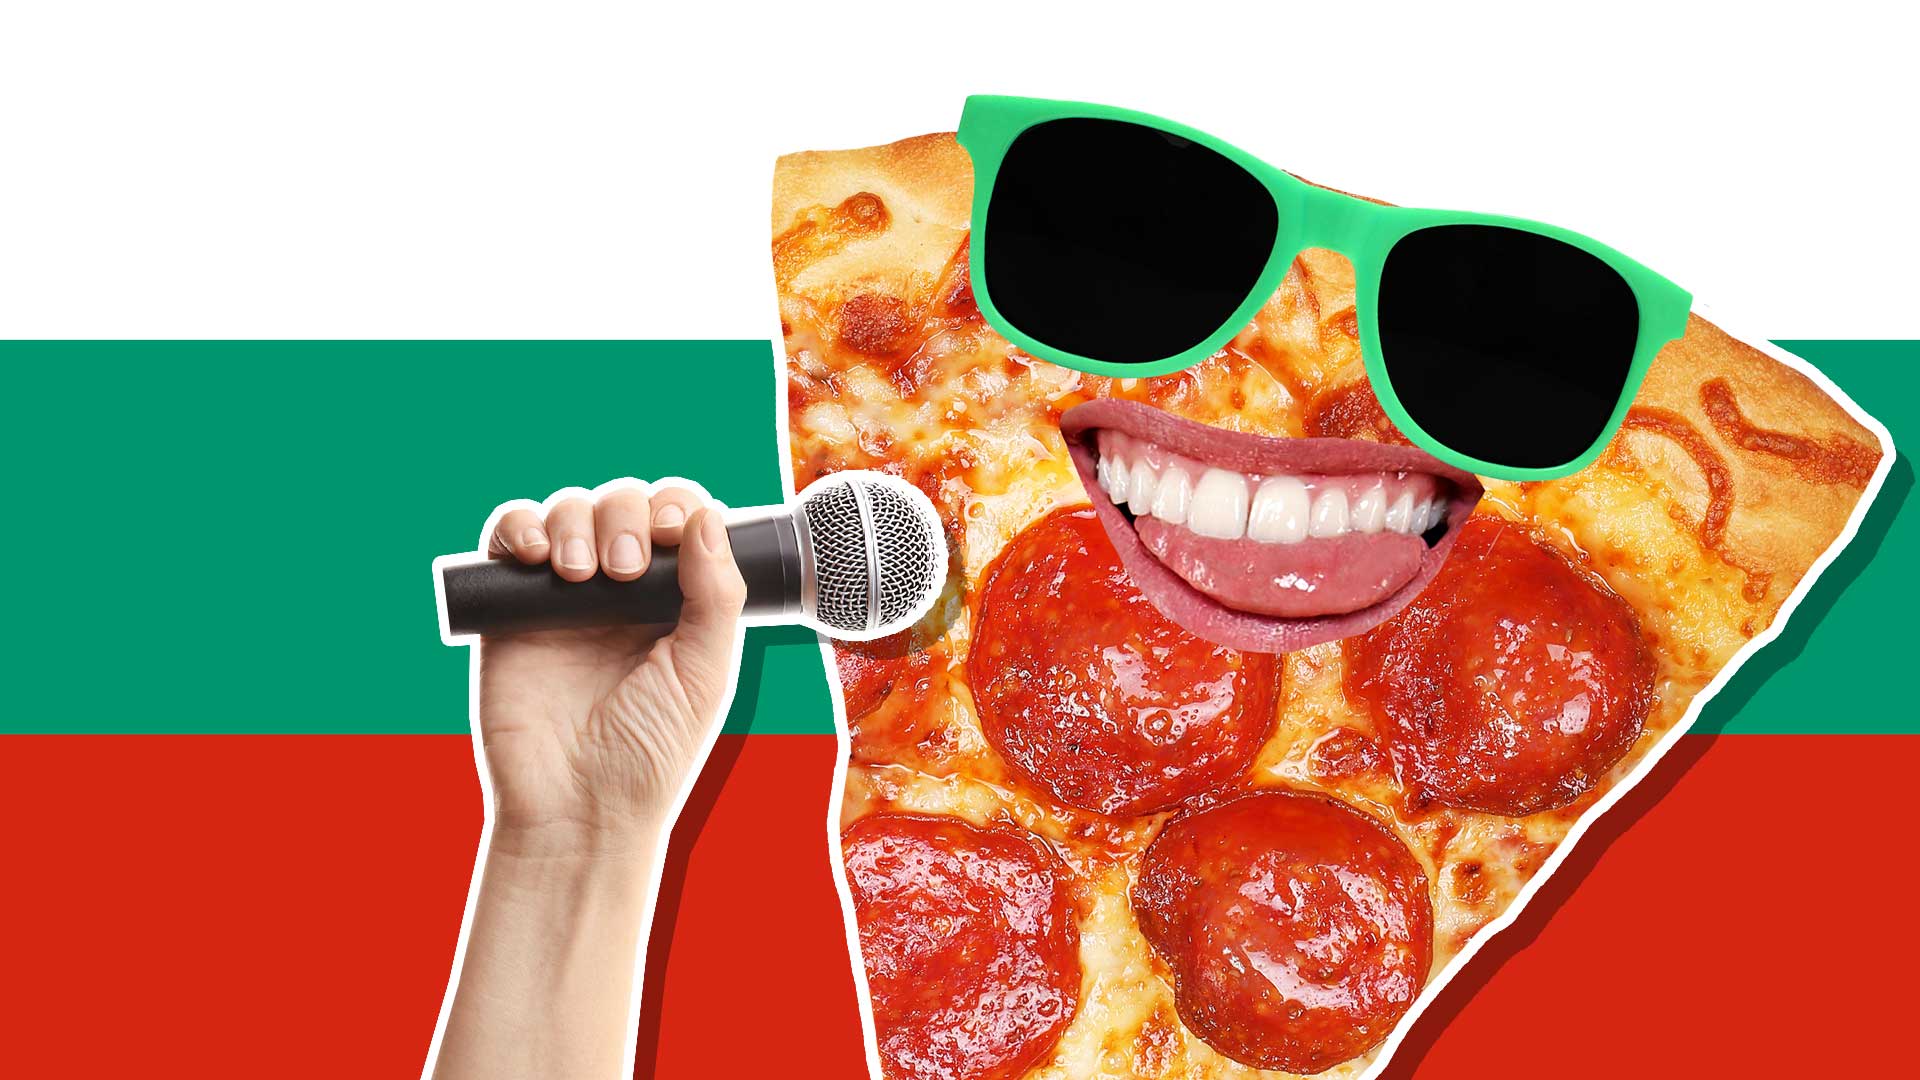 A pizza slice and a Bulgarian flag